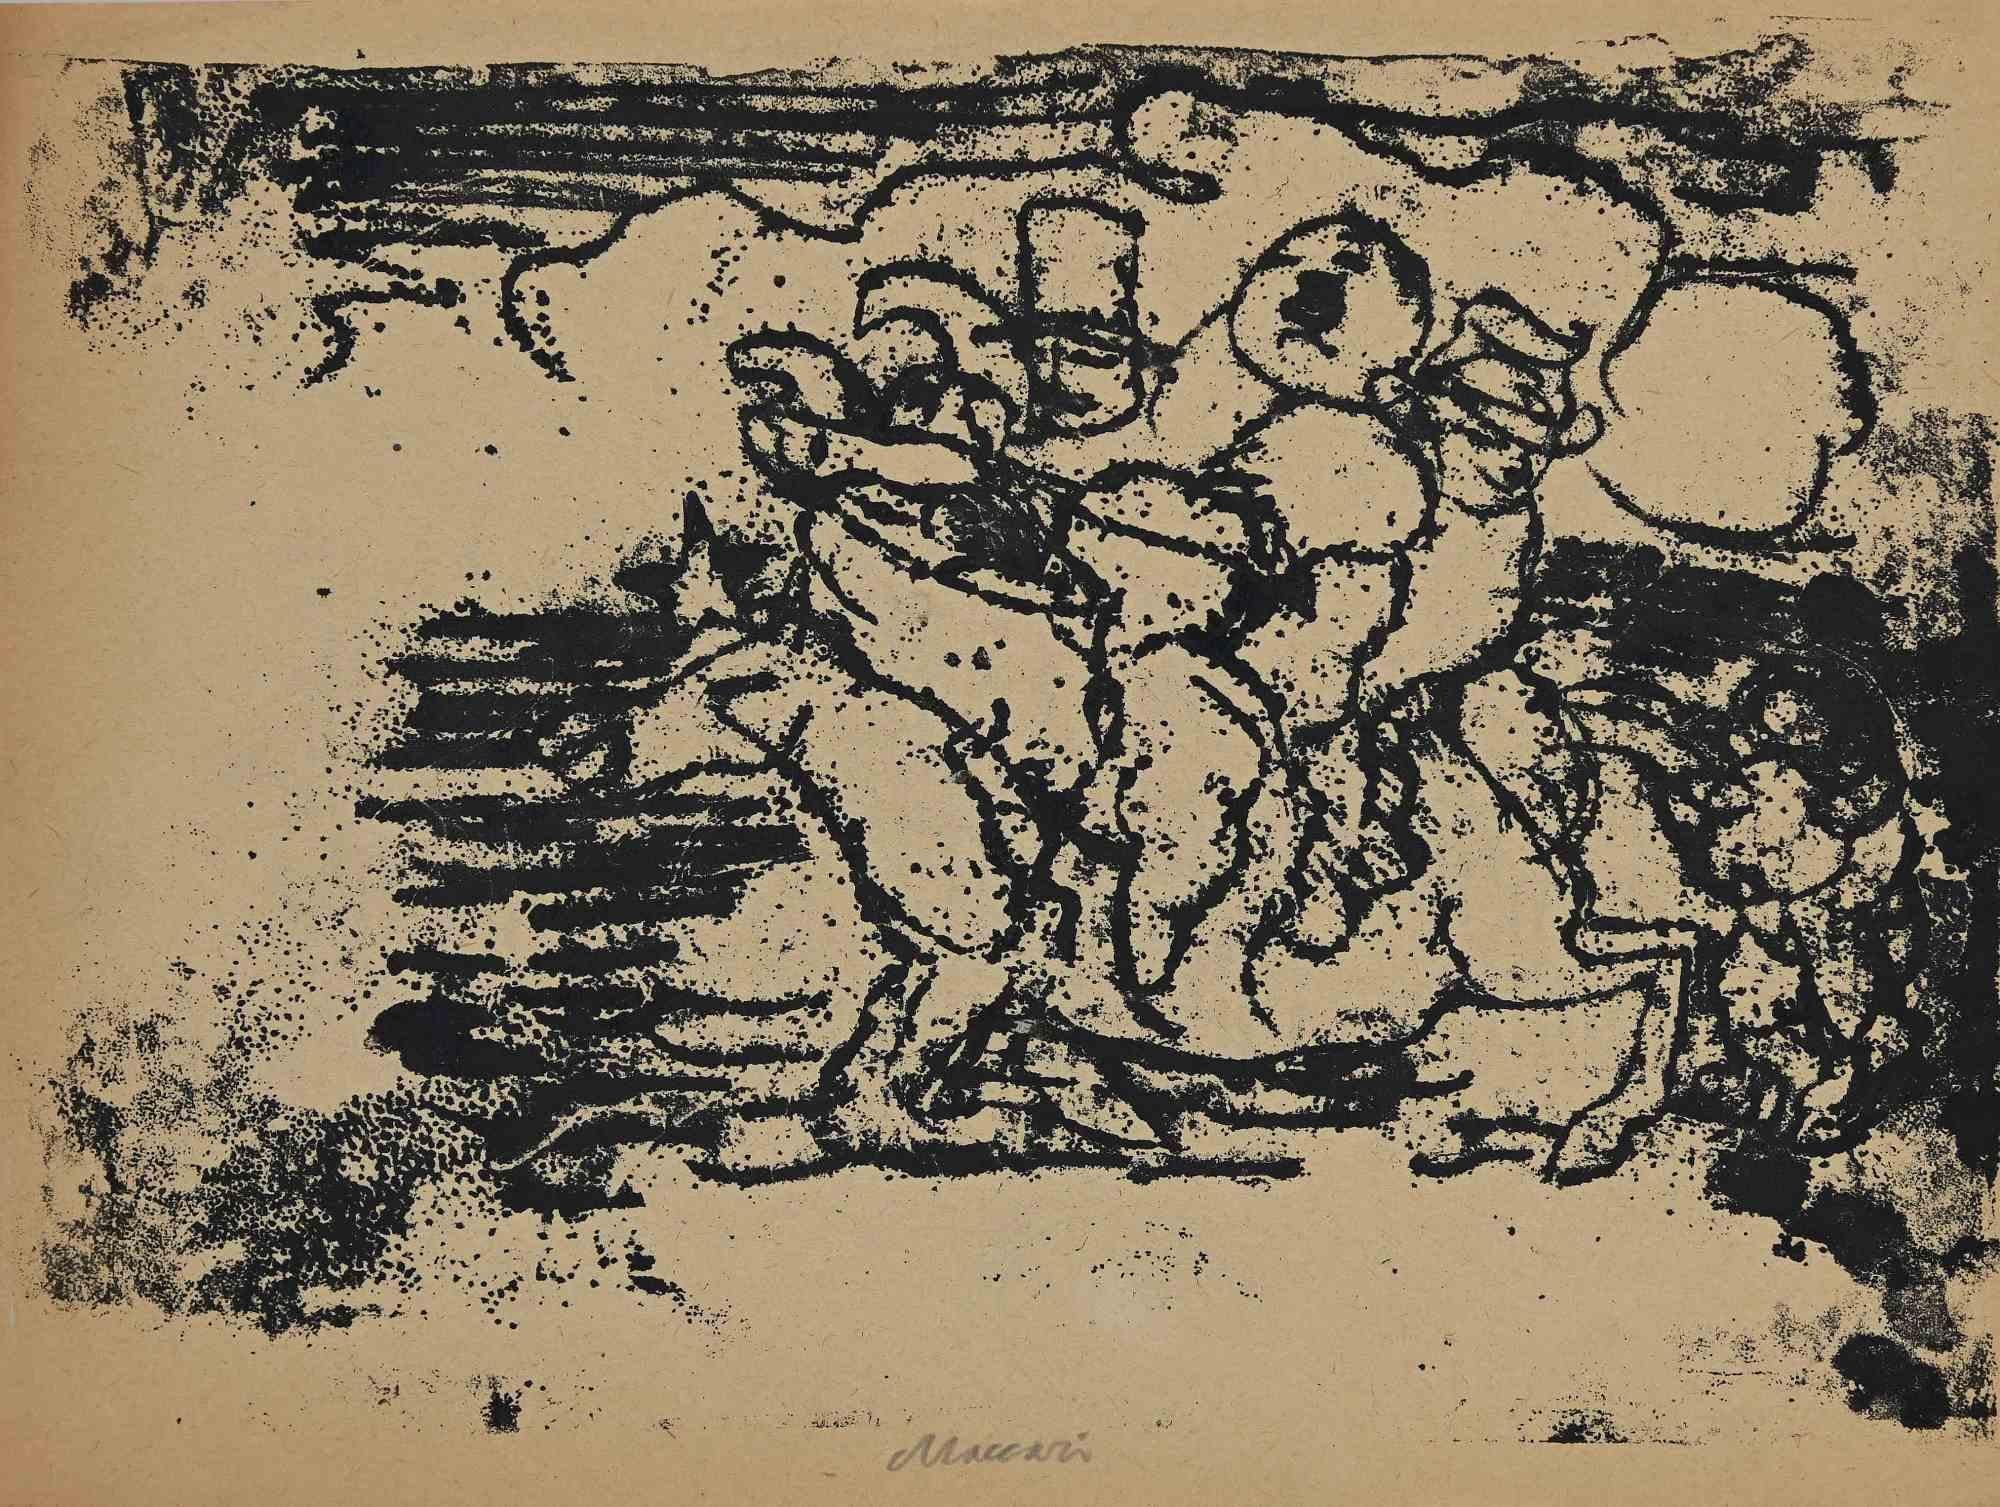 Figures - Drawing by Mino Maccari - Mid 20th Century